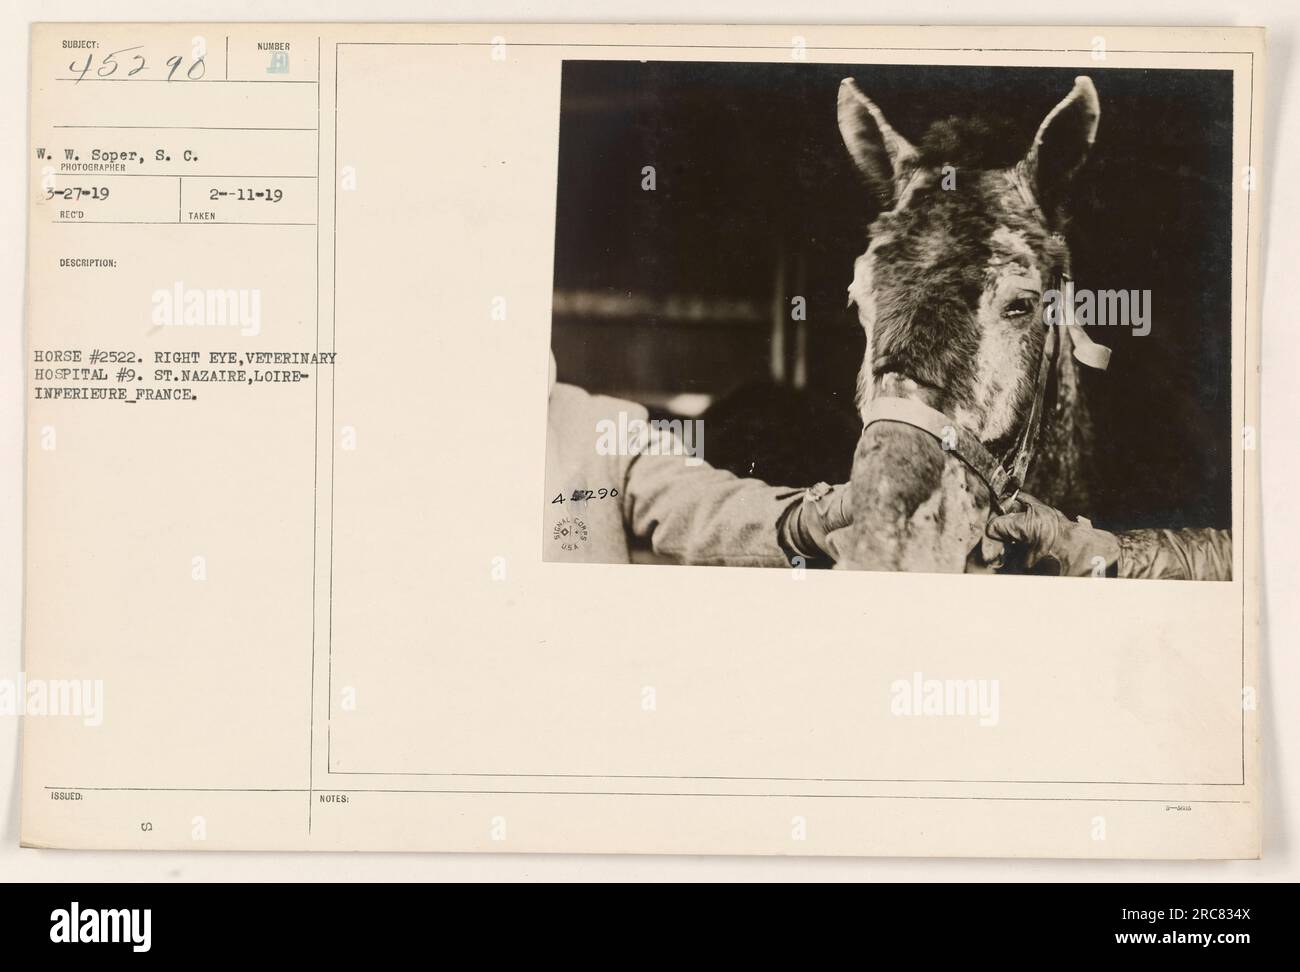 Horse #2522 with some damage to its right eye being cared for at Veterinary Hospital #9 in St. Nazaire, Loire-Inferieure, France. This photograph was taken by W. W. Soper, S. C. on March 27, 1919. The image was part of the collection of military activities during World War One with the assigned description number 45290. Additional notes suggest an issue number of 2, given on November 19, 1919, with a reference to 42.96. Stock Photo